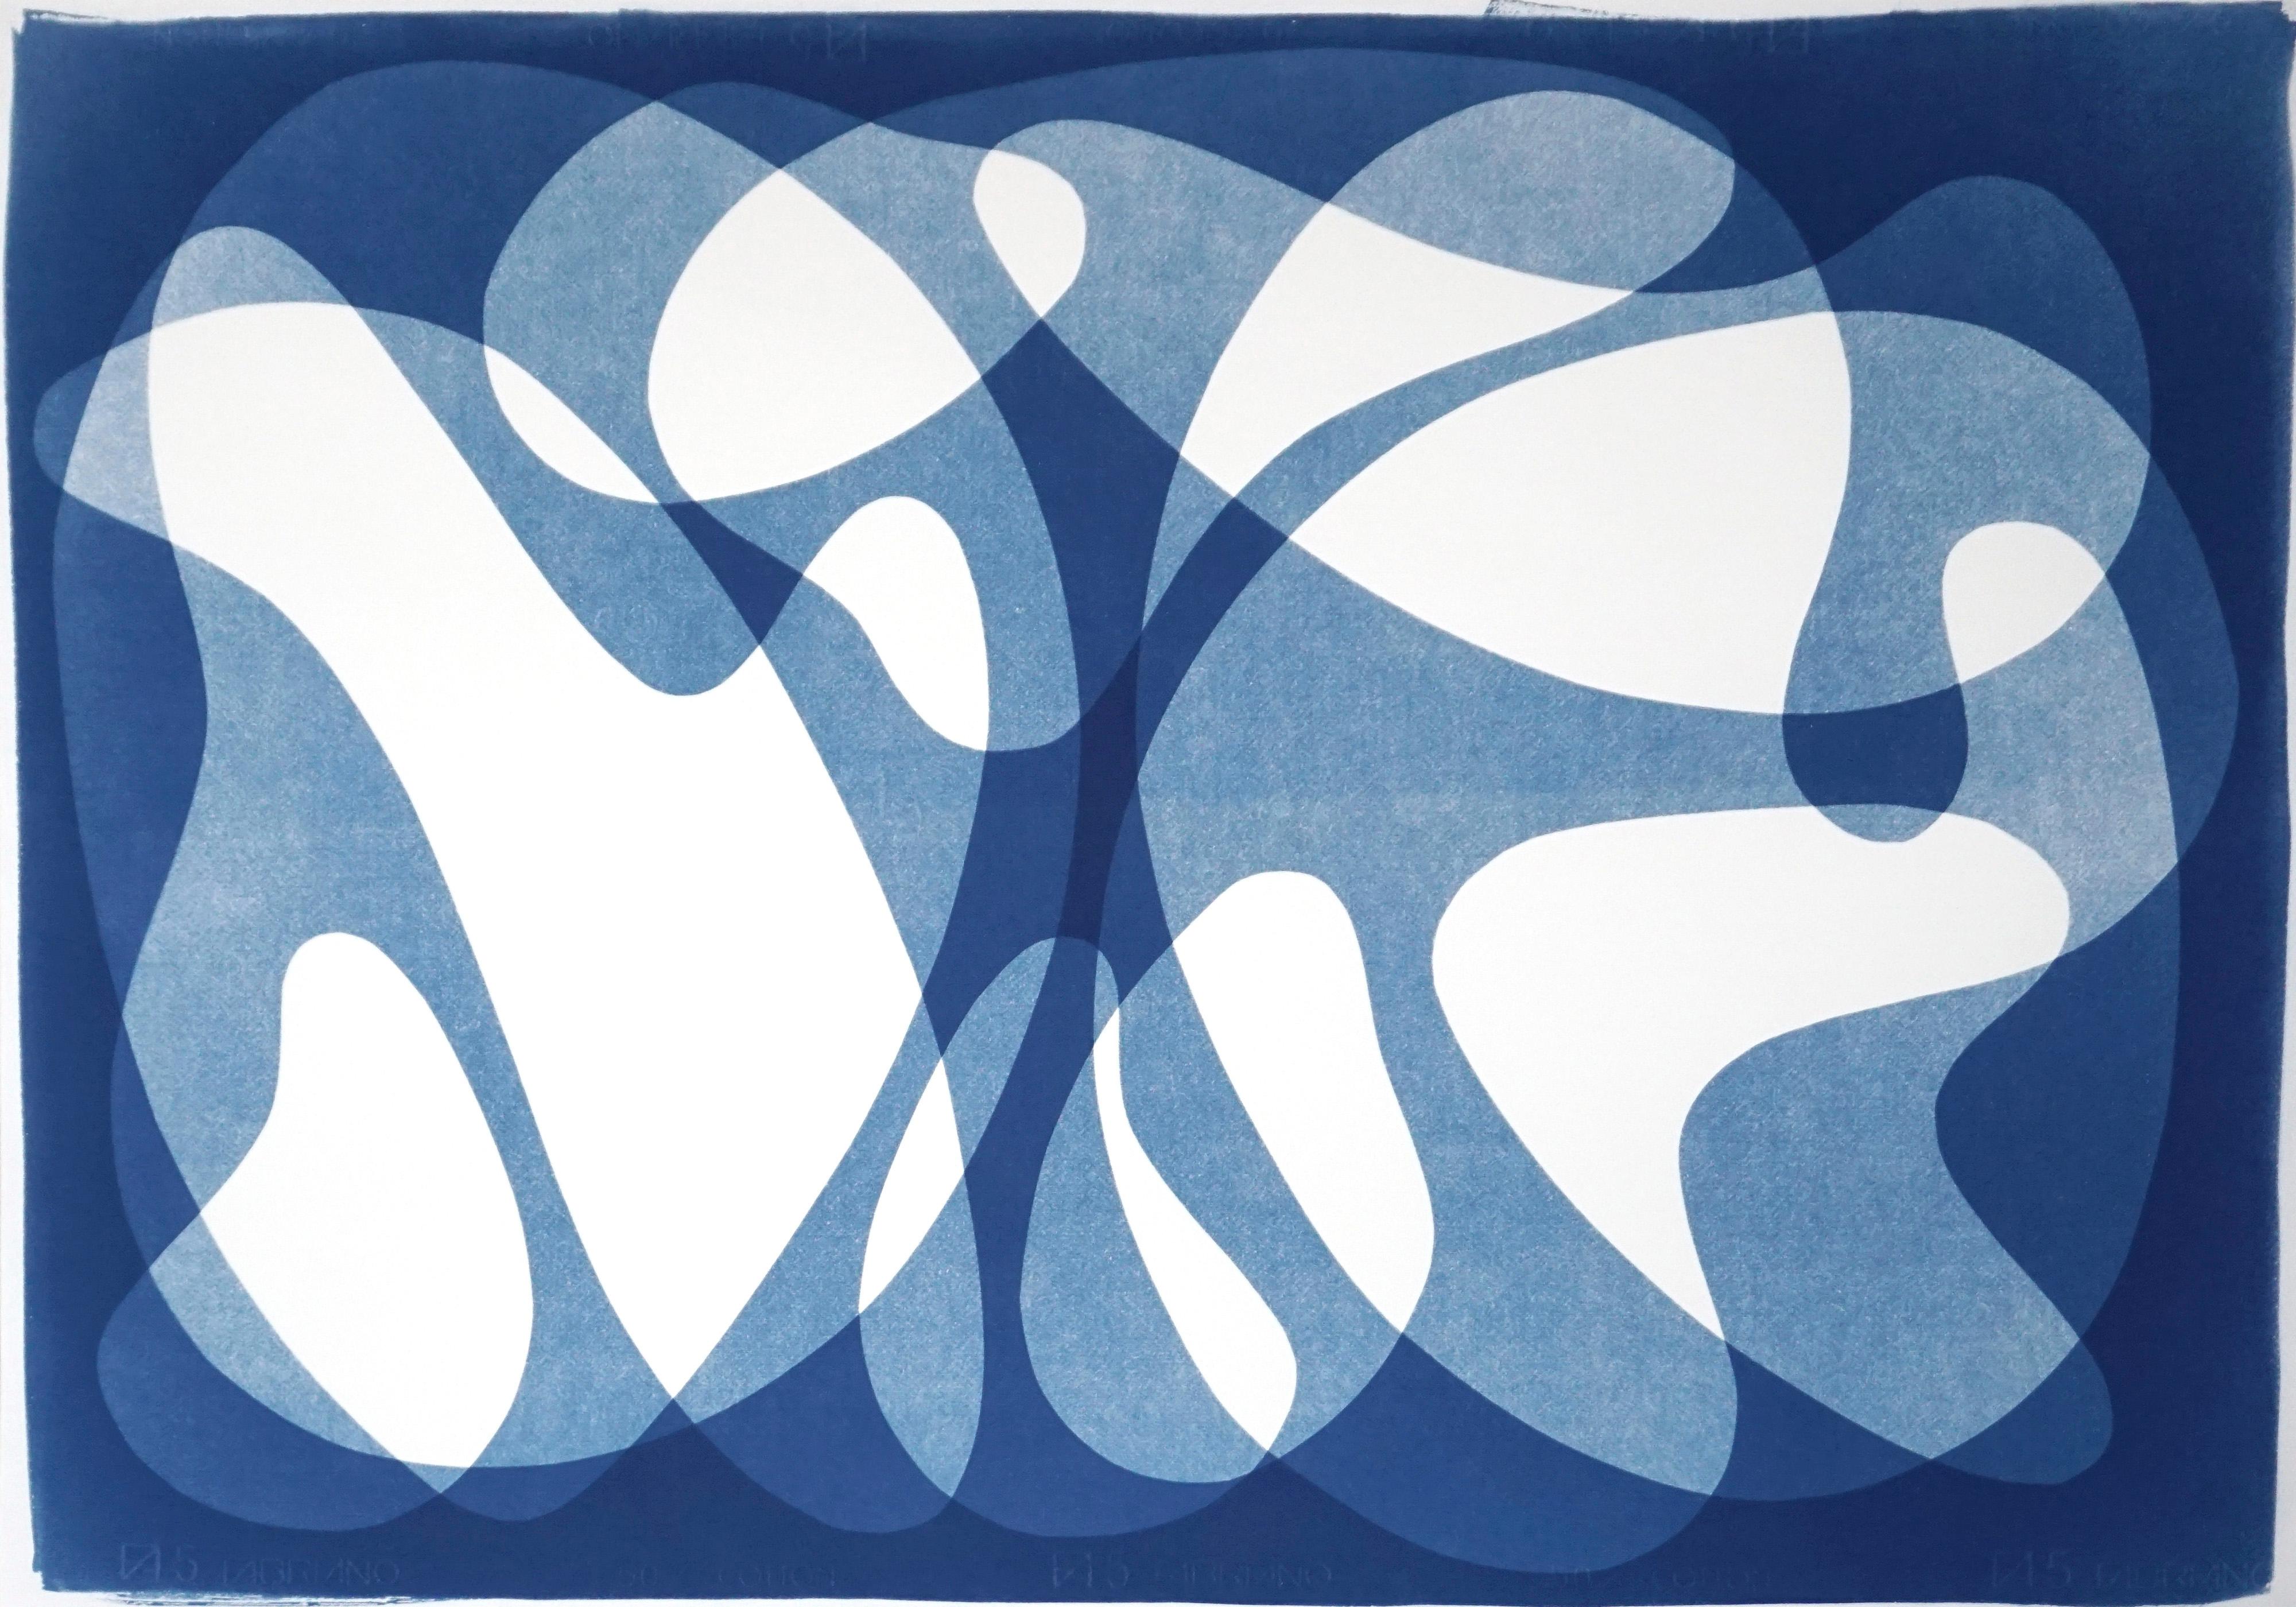 Kind of Cyan Abstract Print - Two Bodies Back to Back, Blue Tones Mid-Century Shapes, Avantgarde Style Print